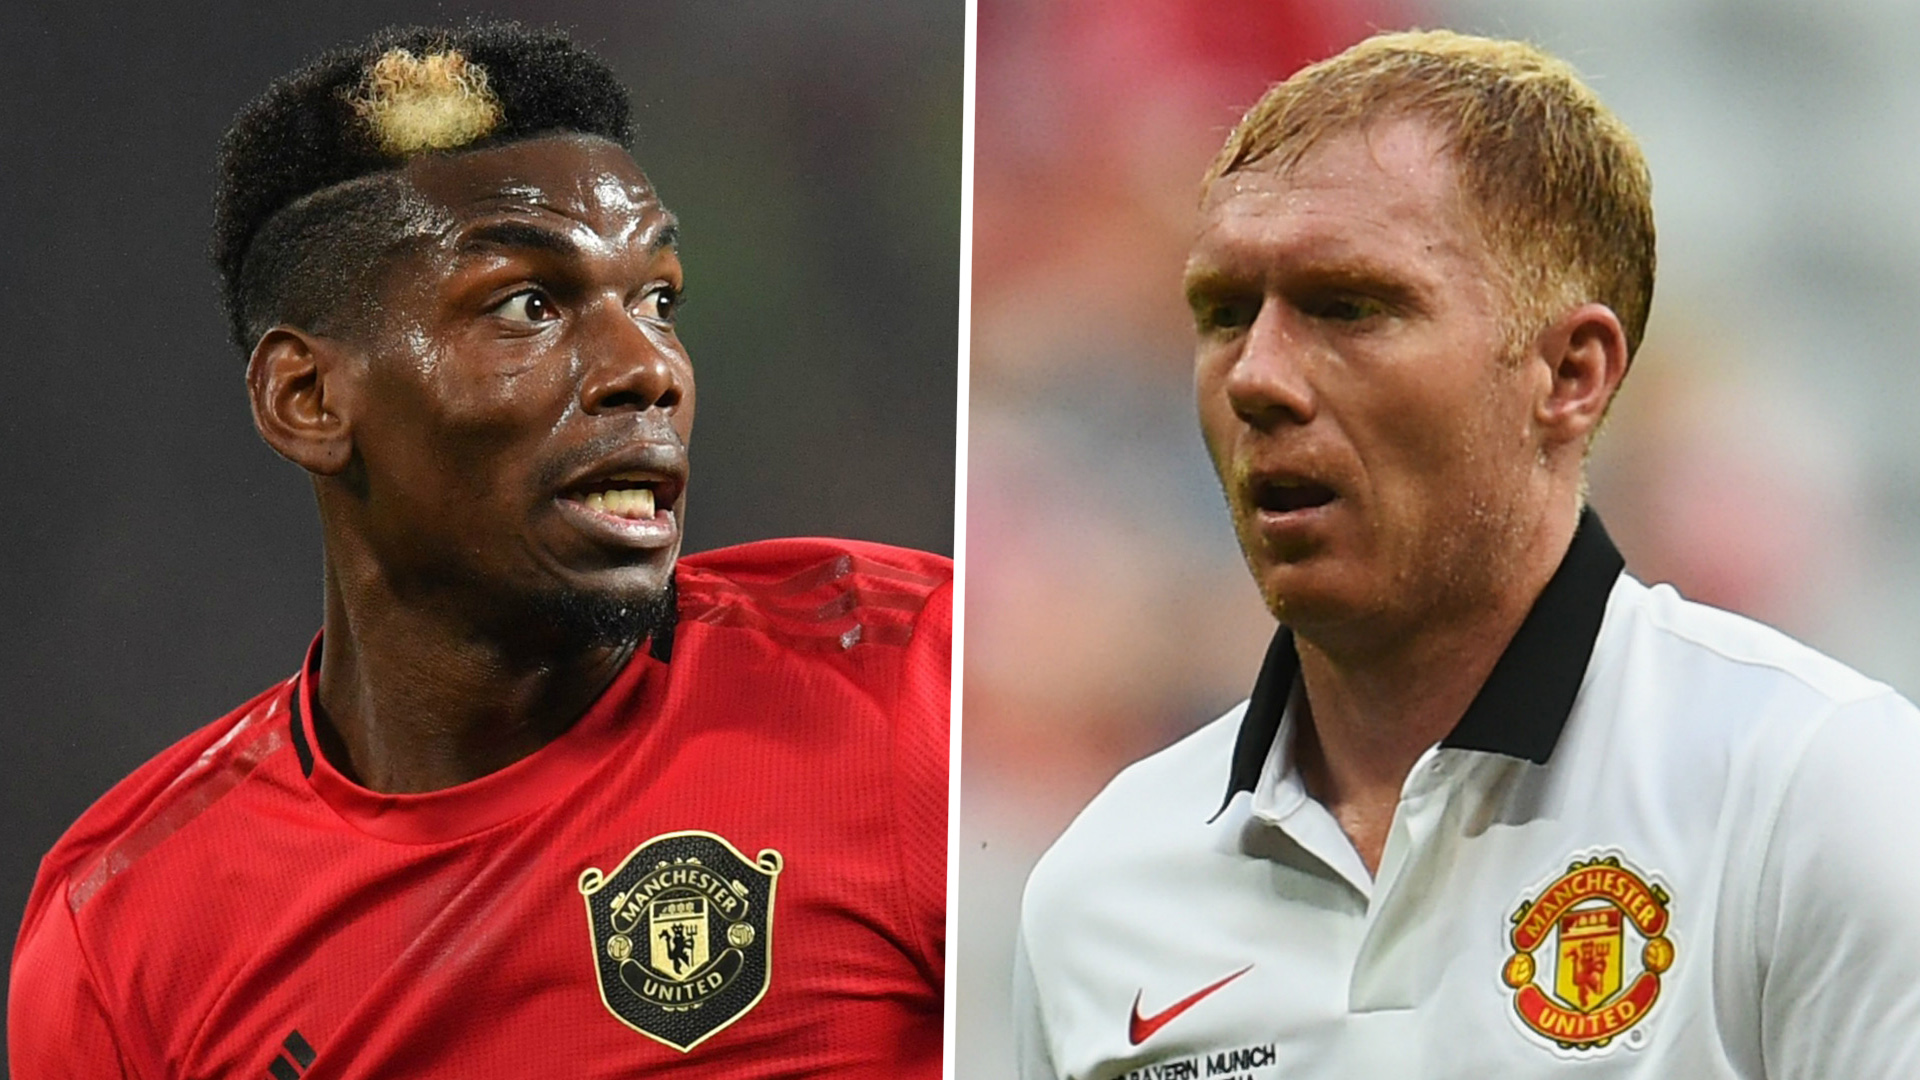 Pogba made a ‘monster’ by Giggs & Scholes kicking him in Man Utd training